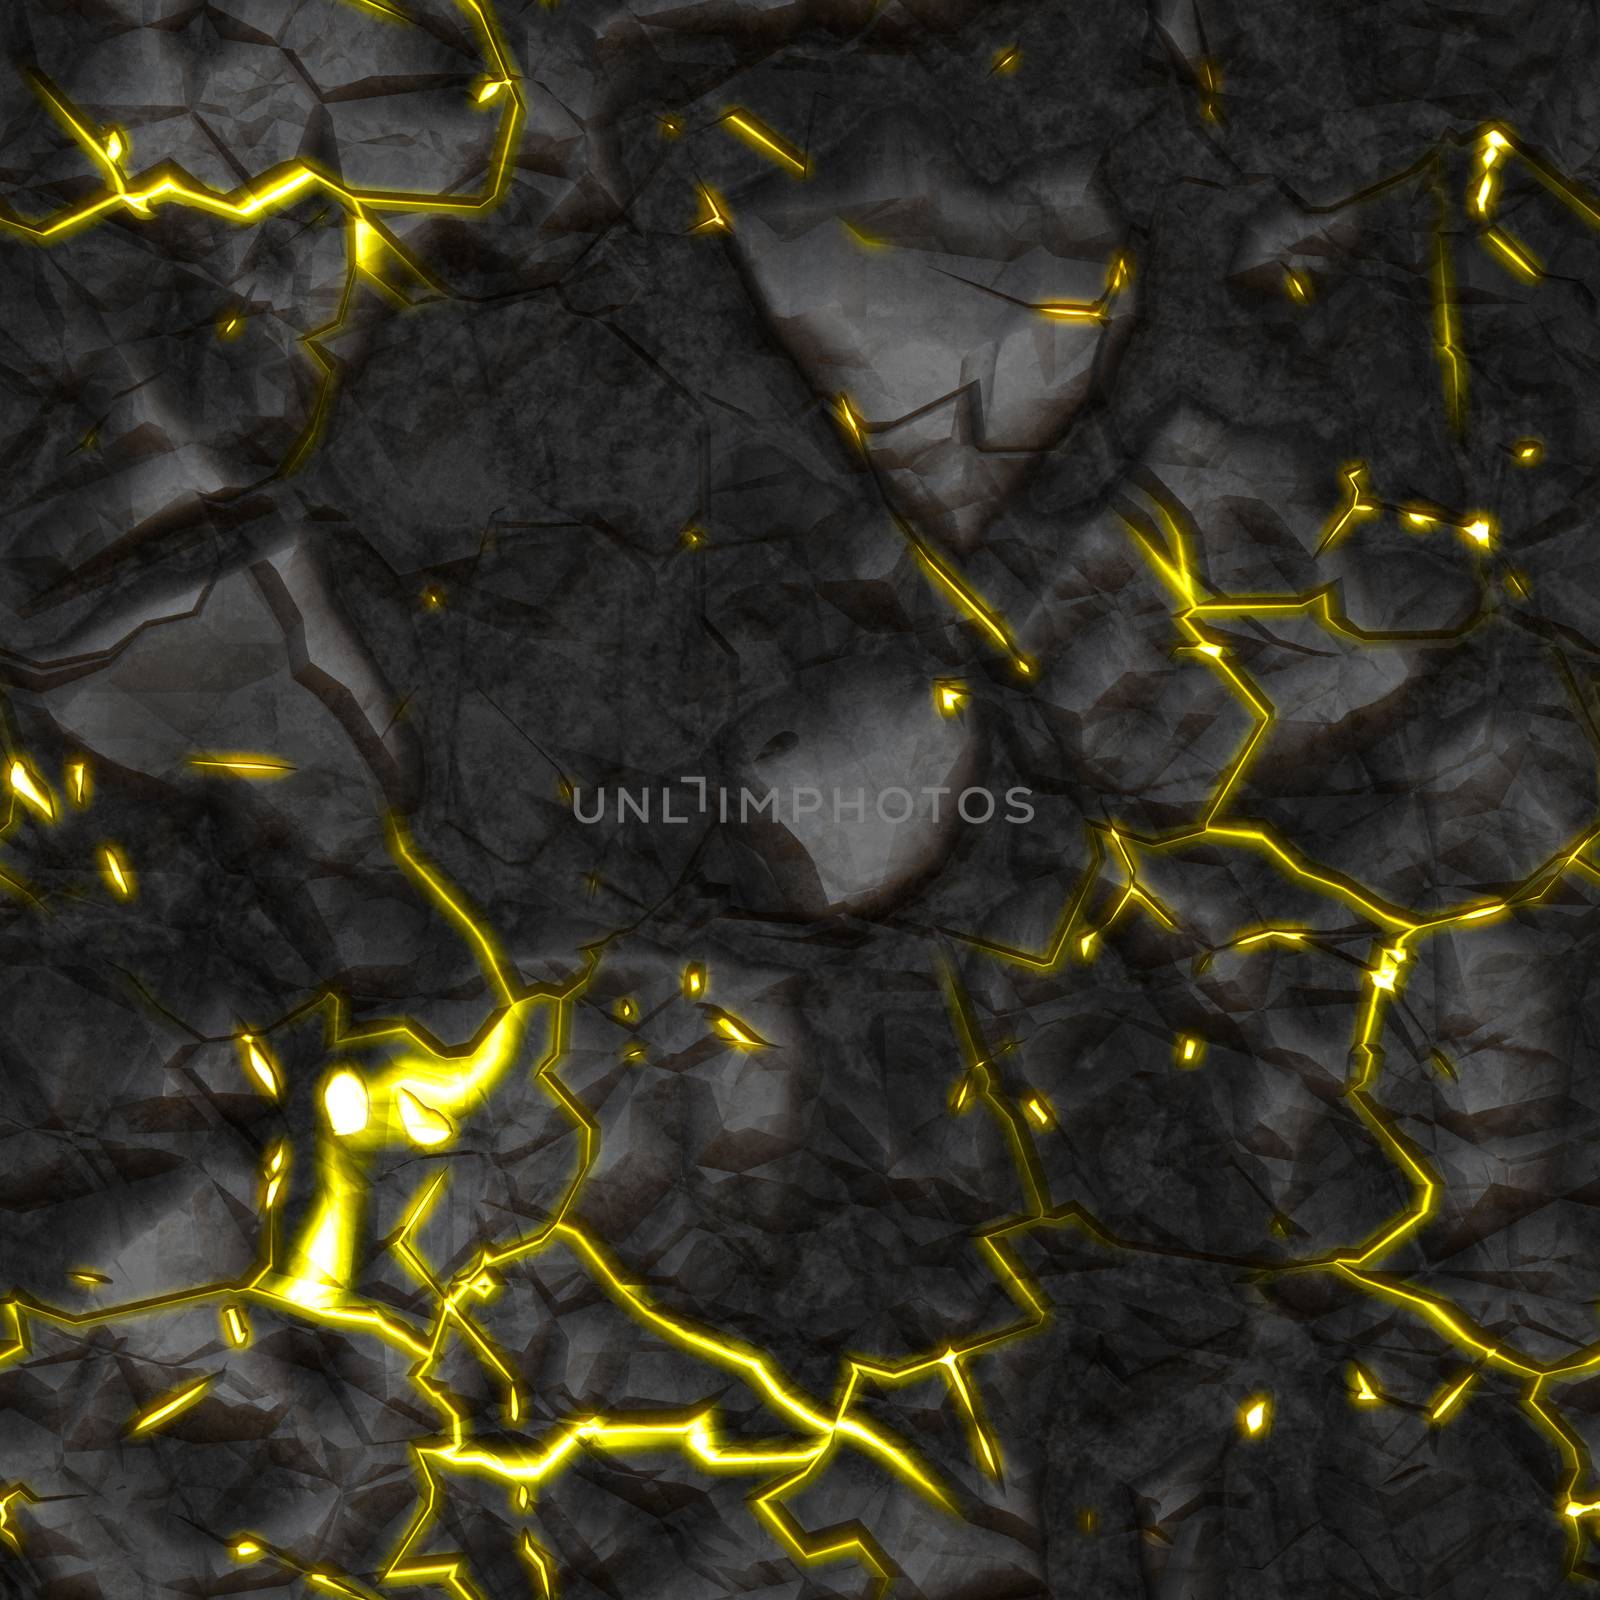 An image of a seamless stone texture with yellow glowing cracks